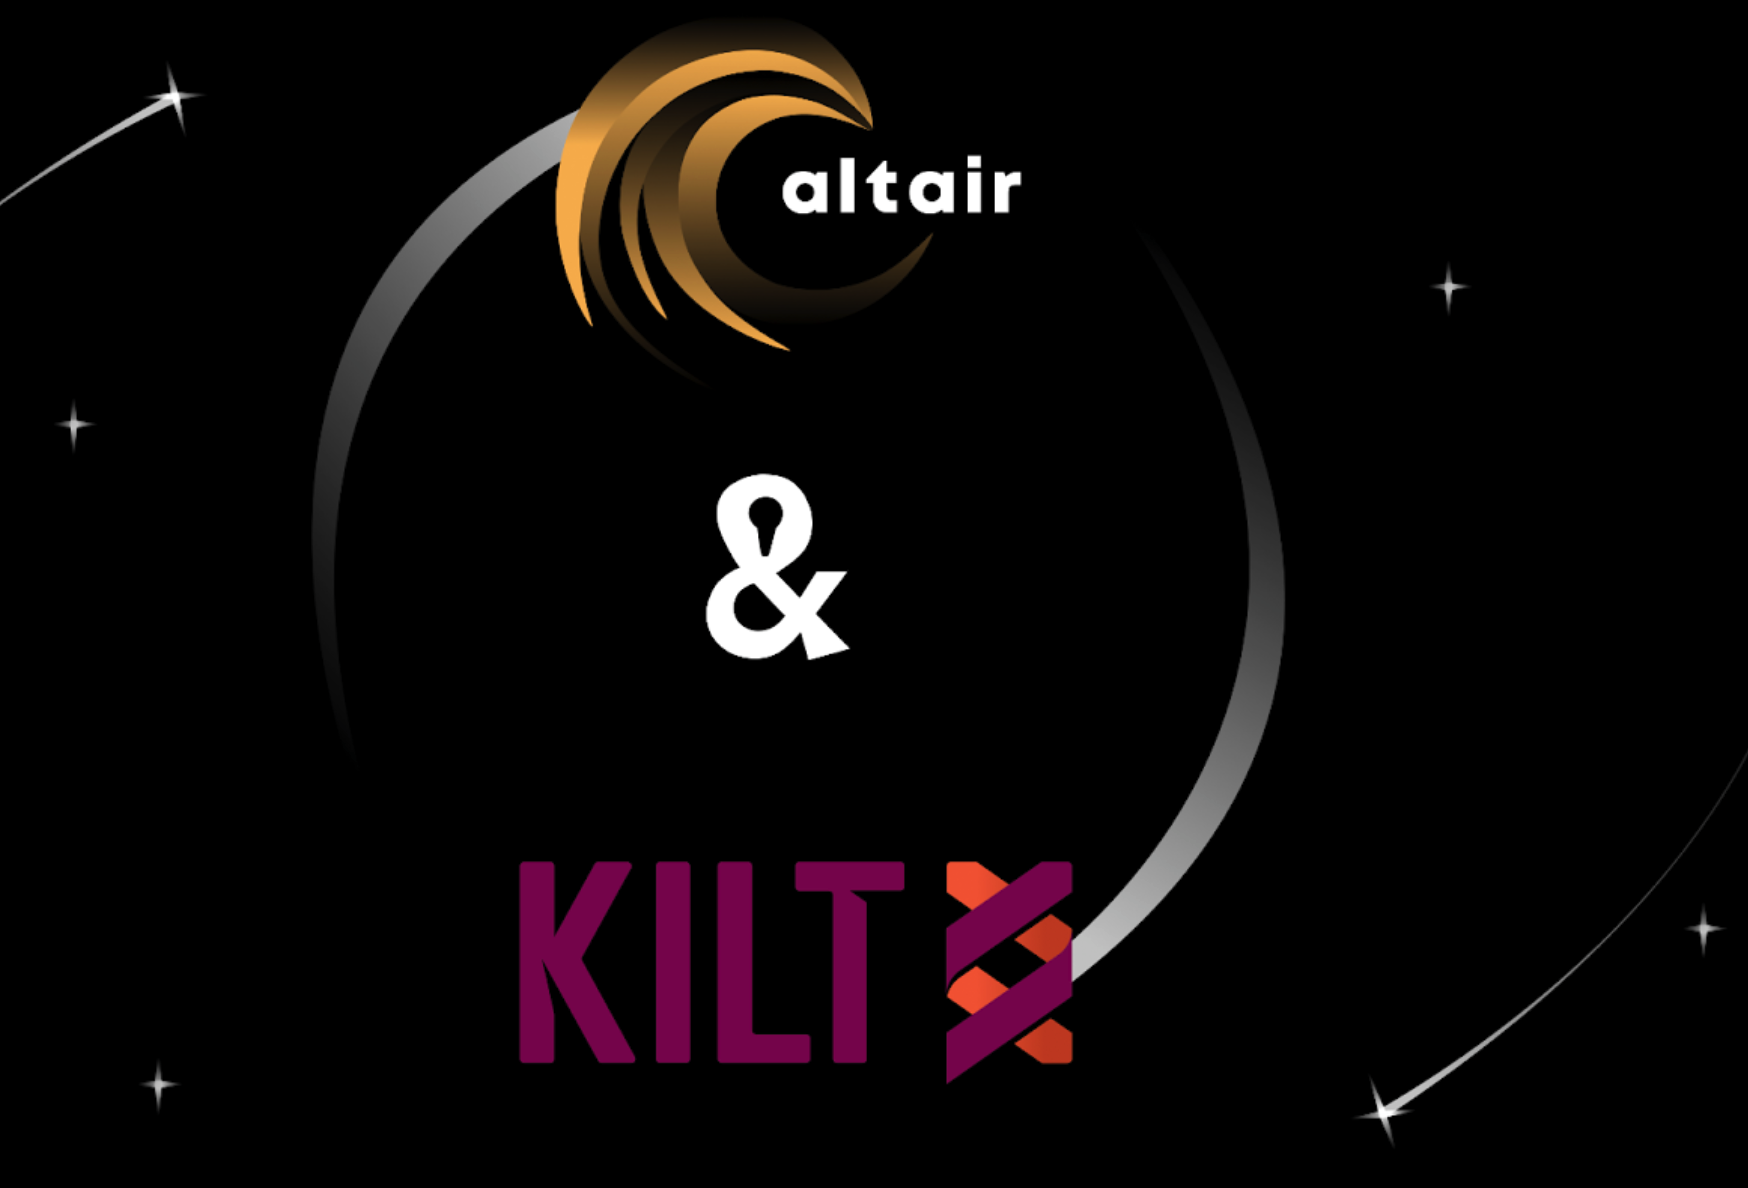 https://azcoinnews.com/altair-network-cooperates-with-kilt-protocol-bridging-real-world-assets-and-defi.html